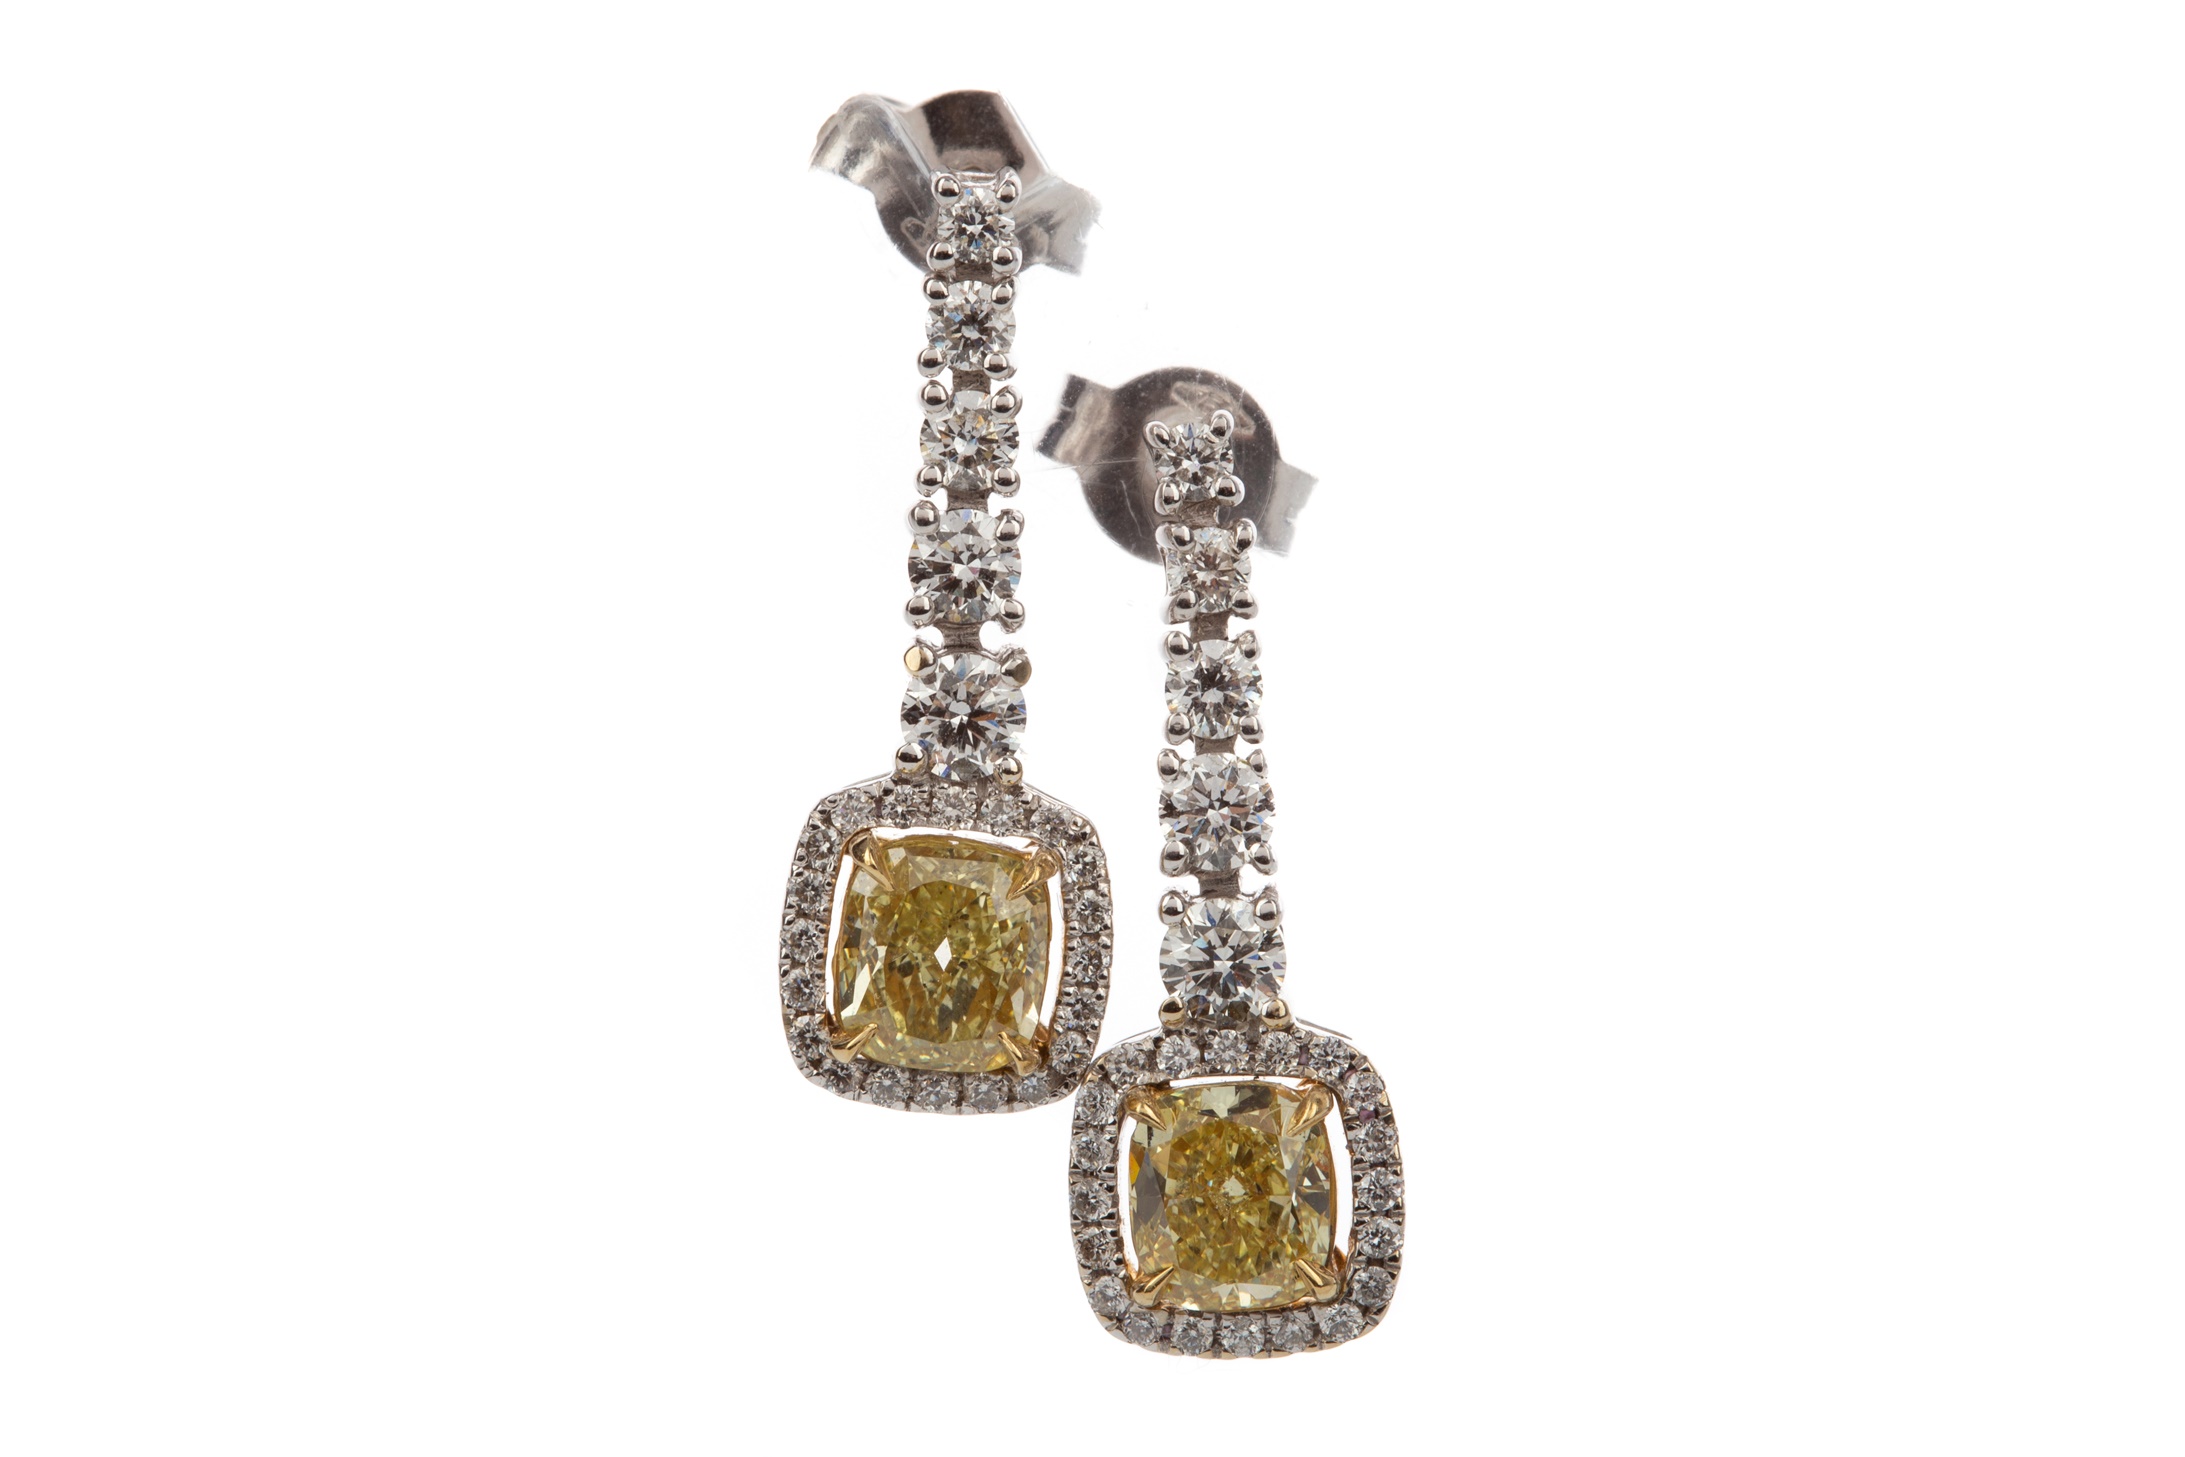 A PAIR OF GIA CERTIFICATED FANCY YELLOW DIAMOND EARRINGS